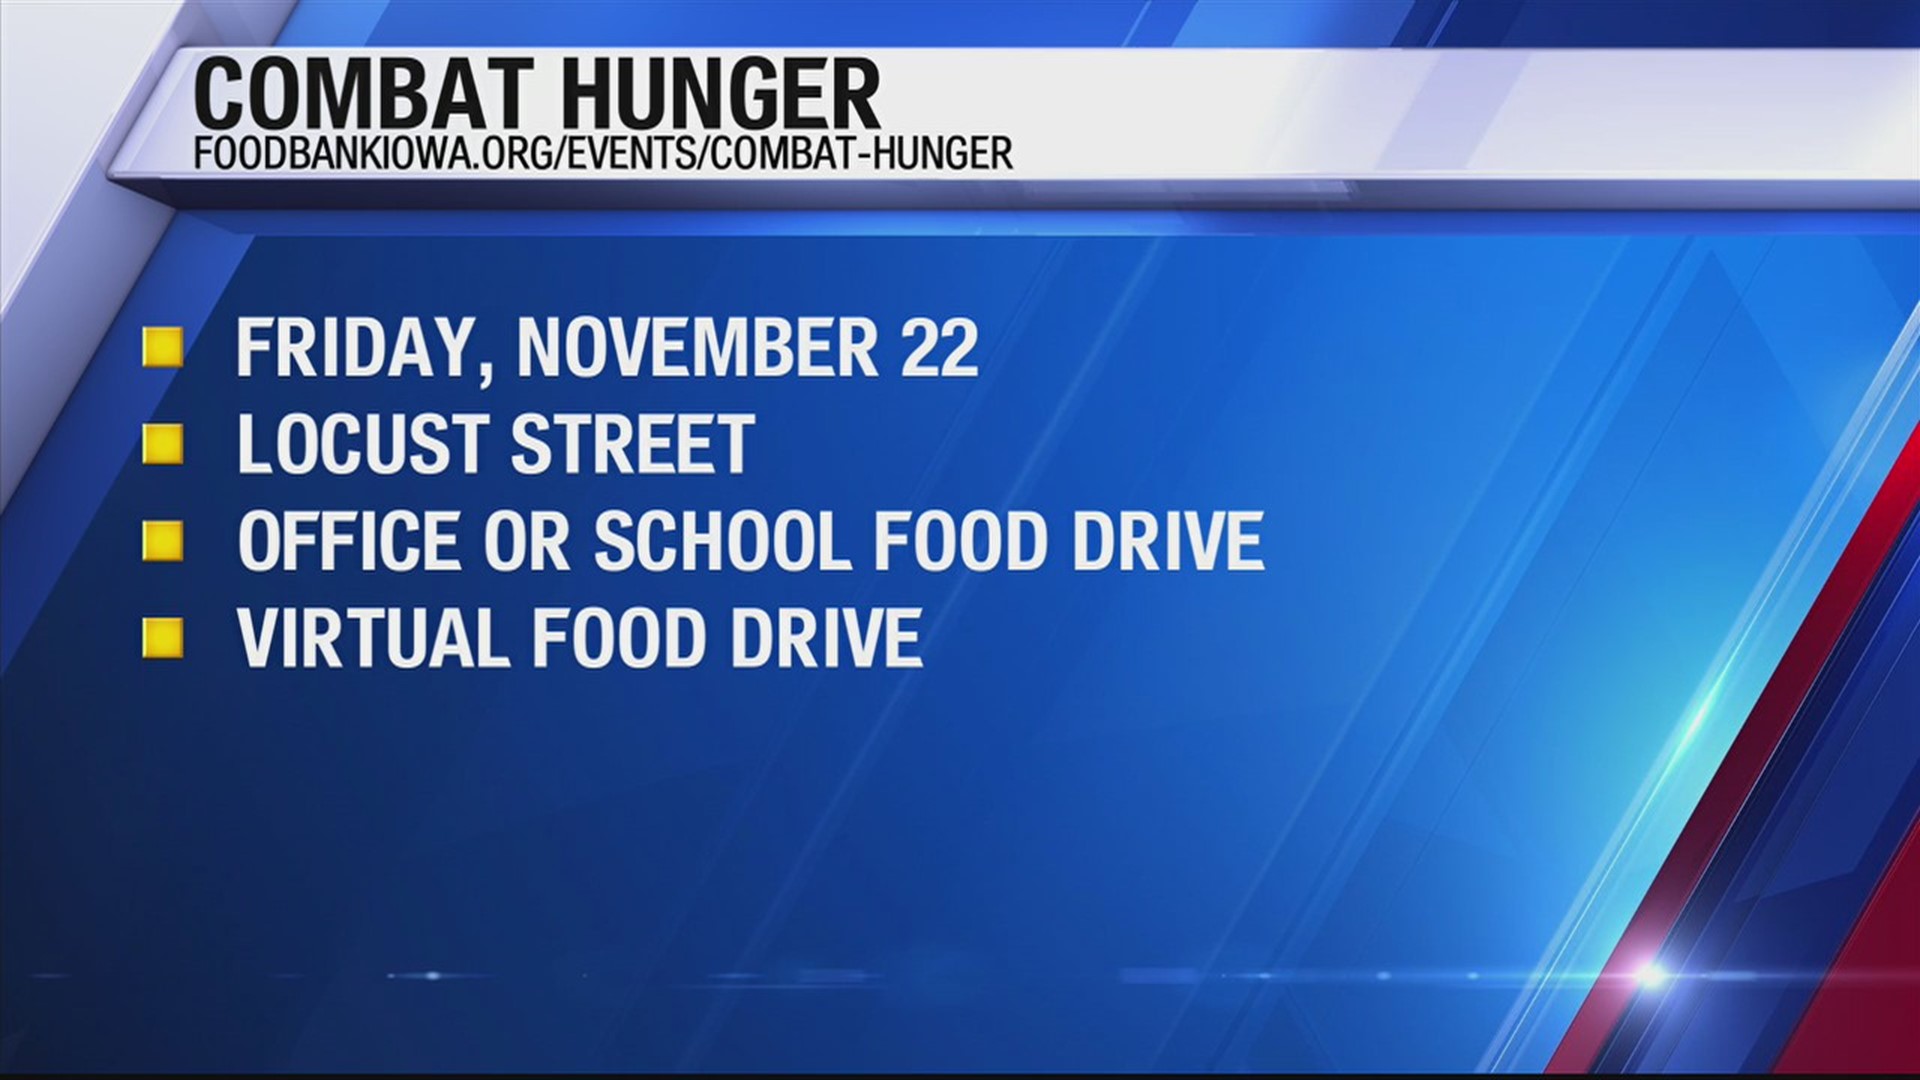 Combat Hunger is this Friday, November 22nd.